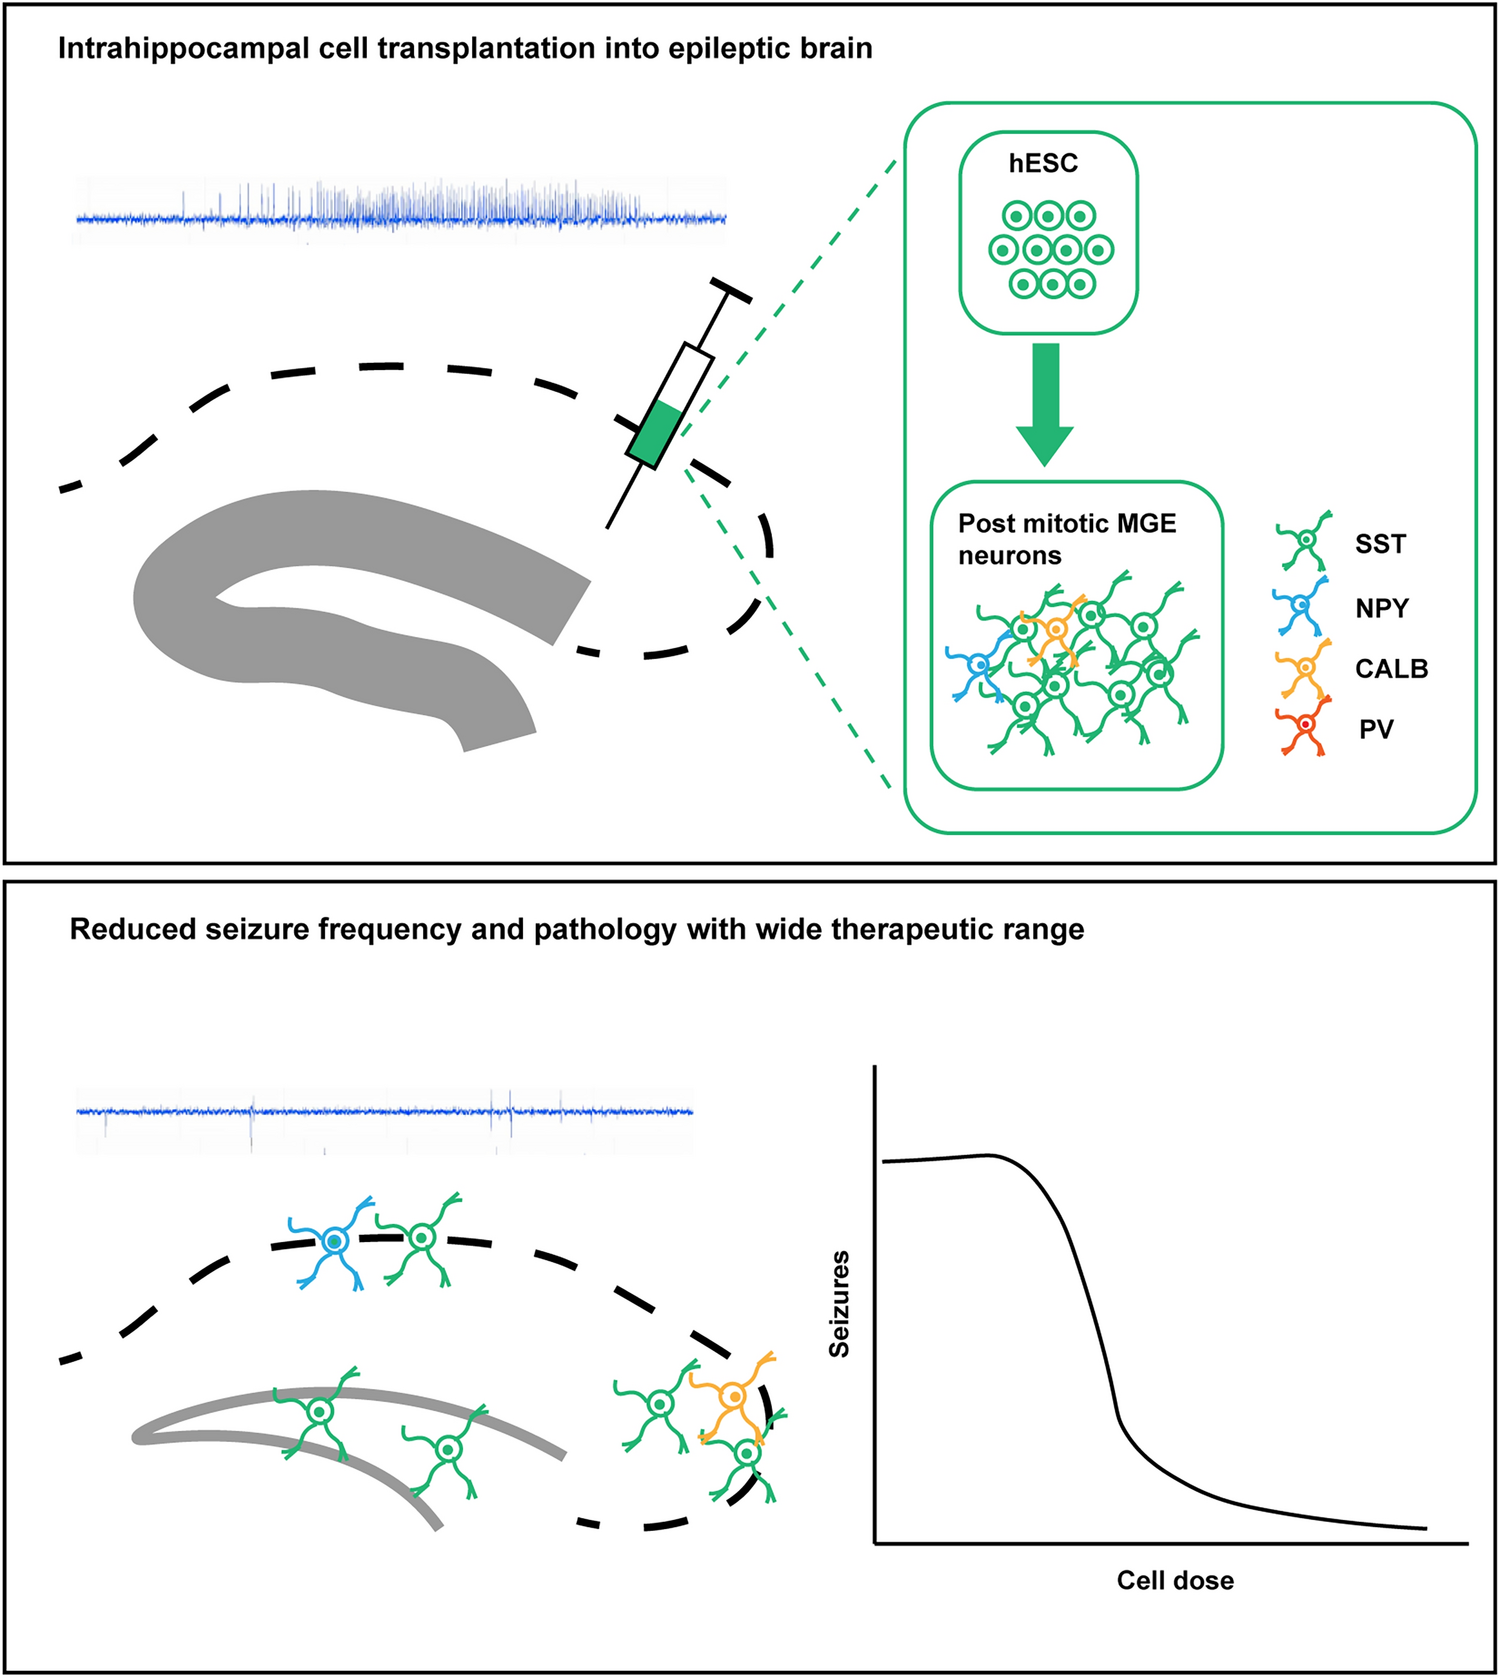 GABAergic Interneuron Cell Therapy for Drug-Resistant Epilepsy